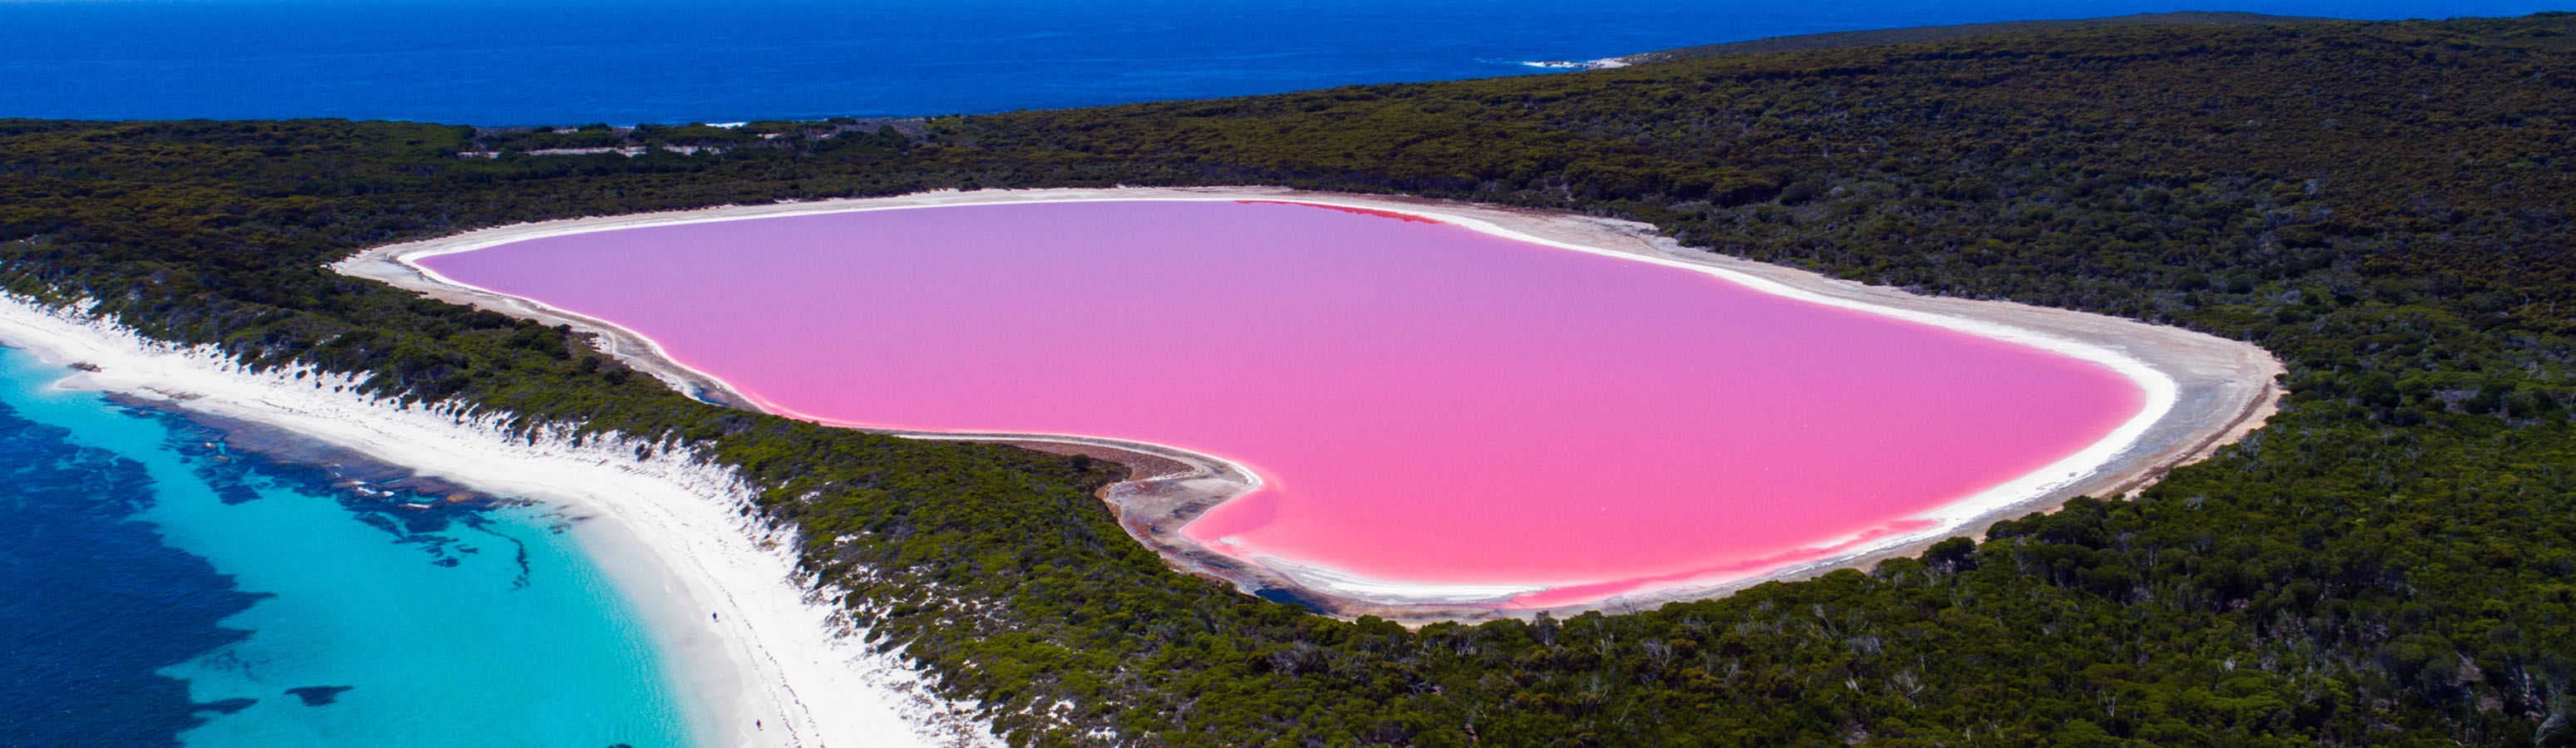 Exploring the Lakes III. - Pink Lake Hillier